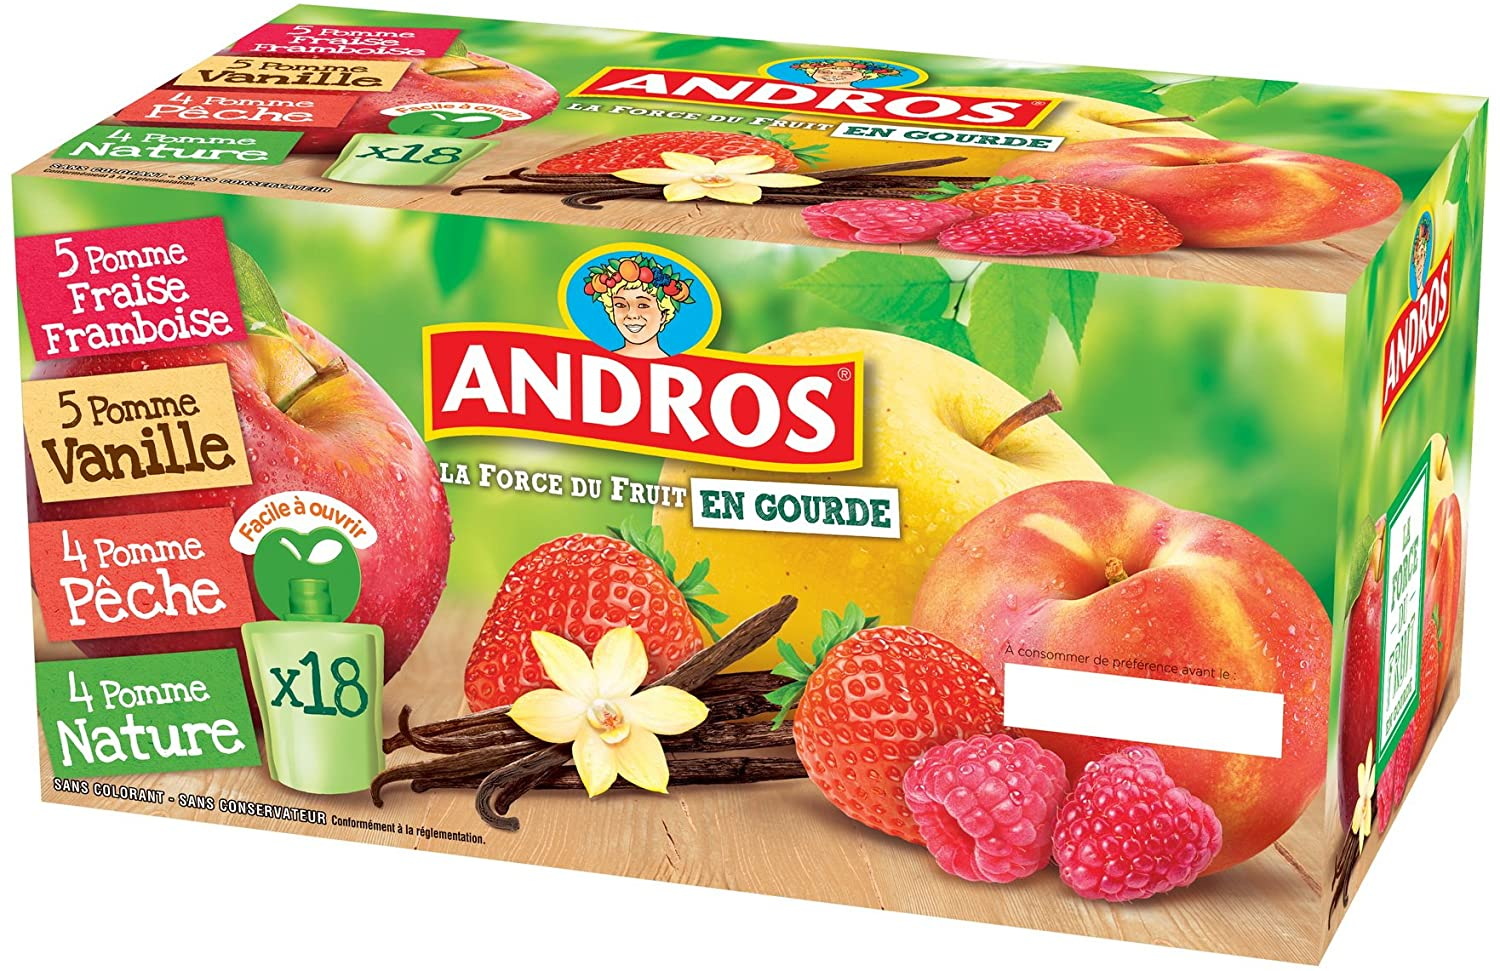 ANDROS Andros compote de pomme nature gourde 18x90g pas cher